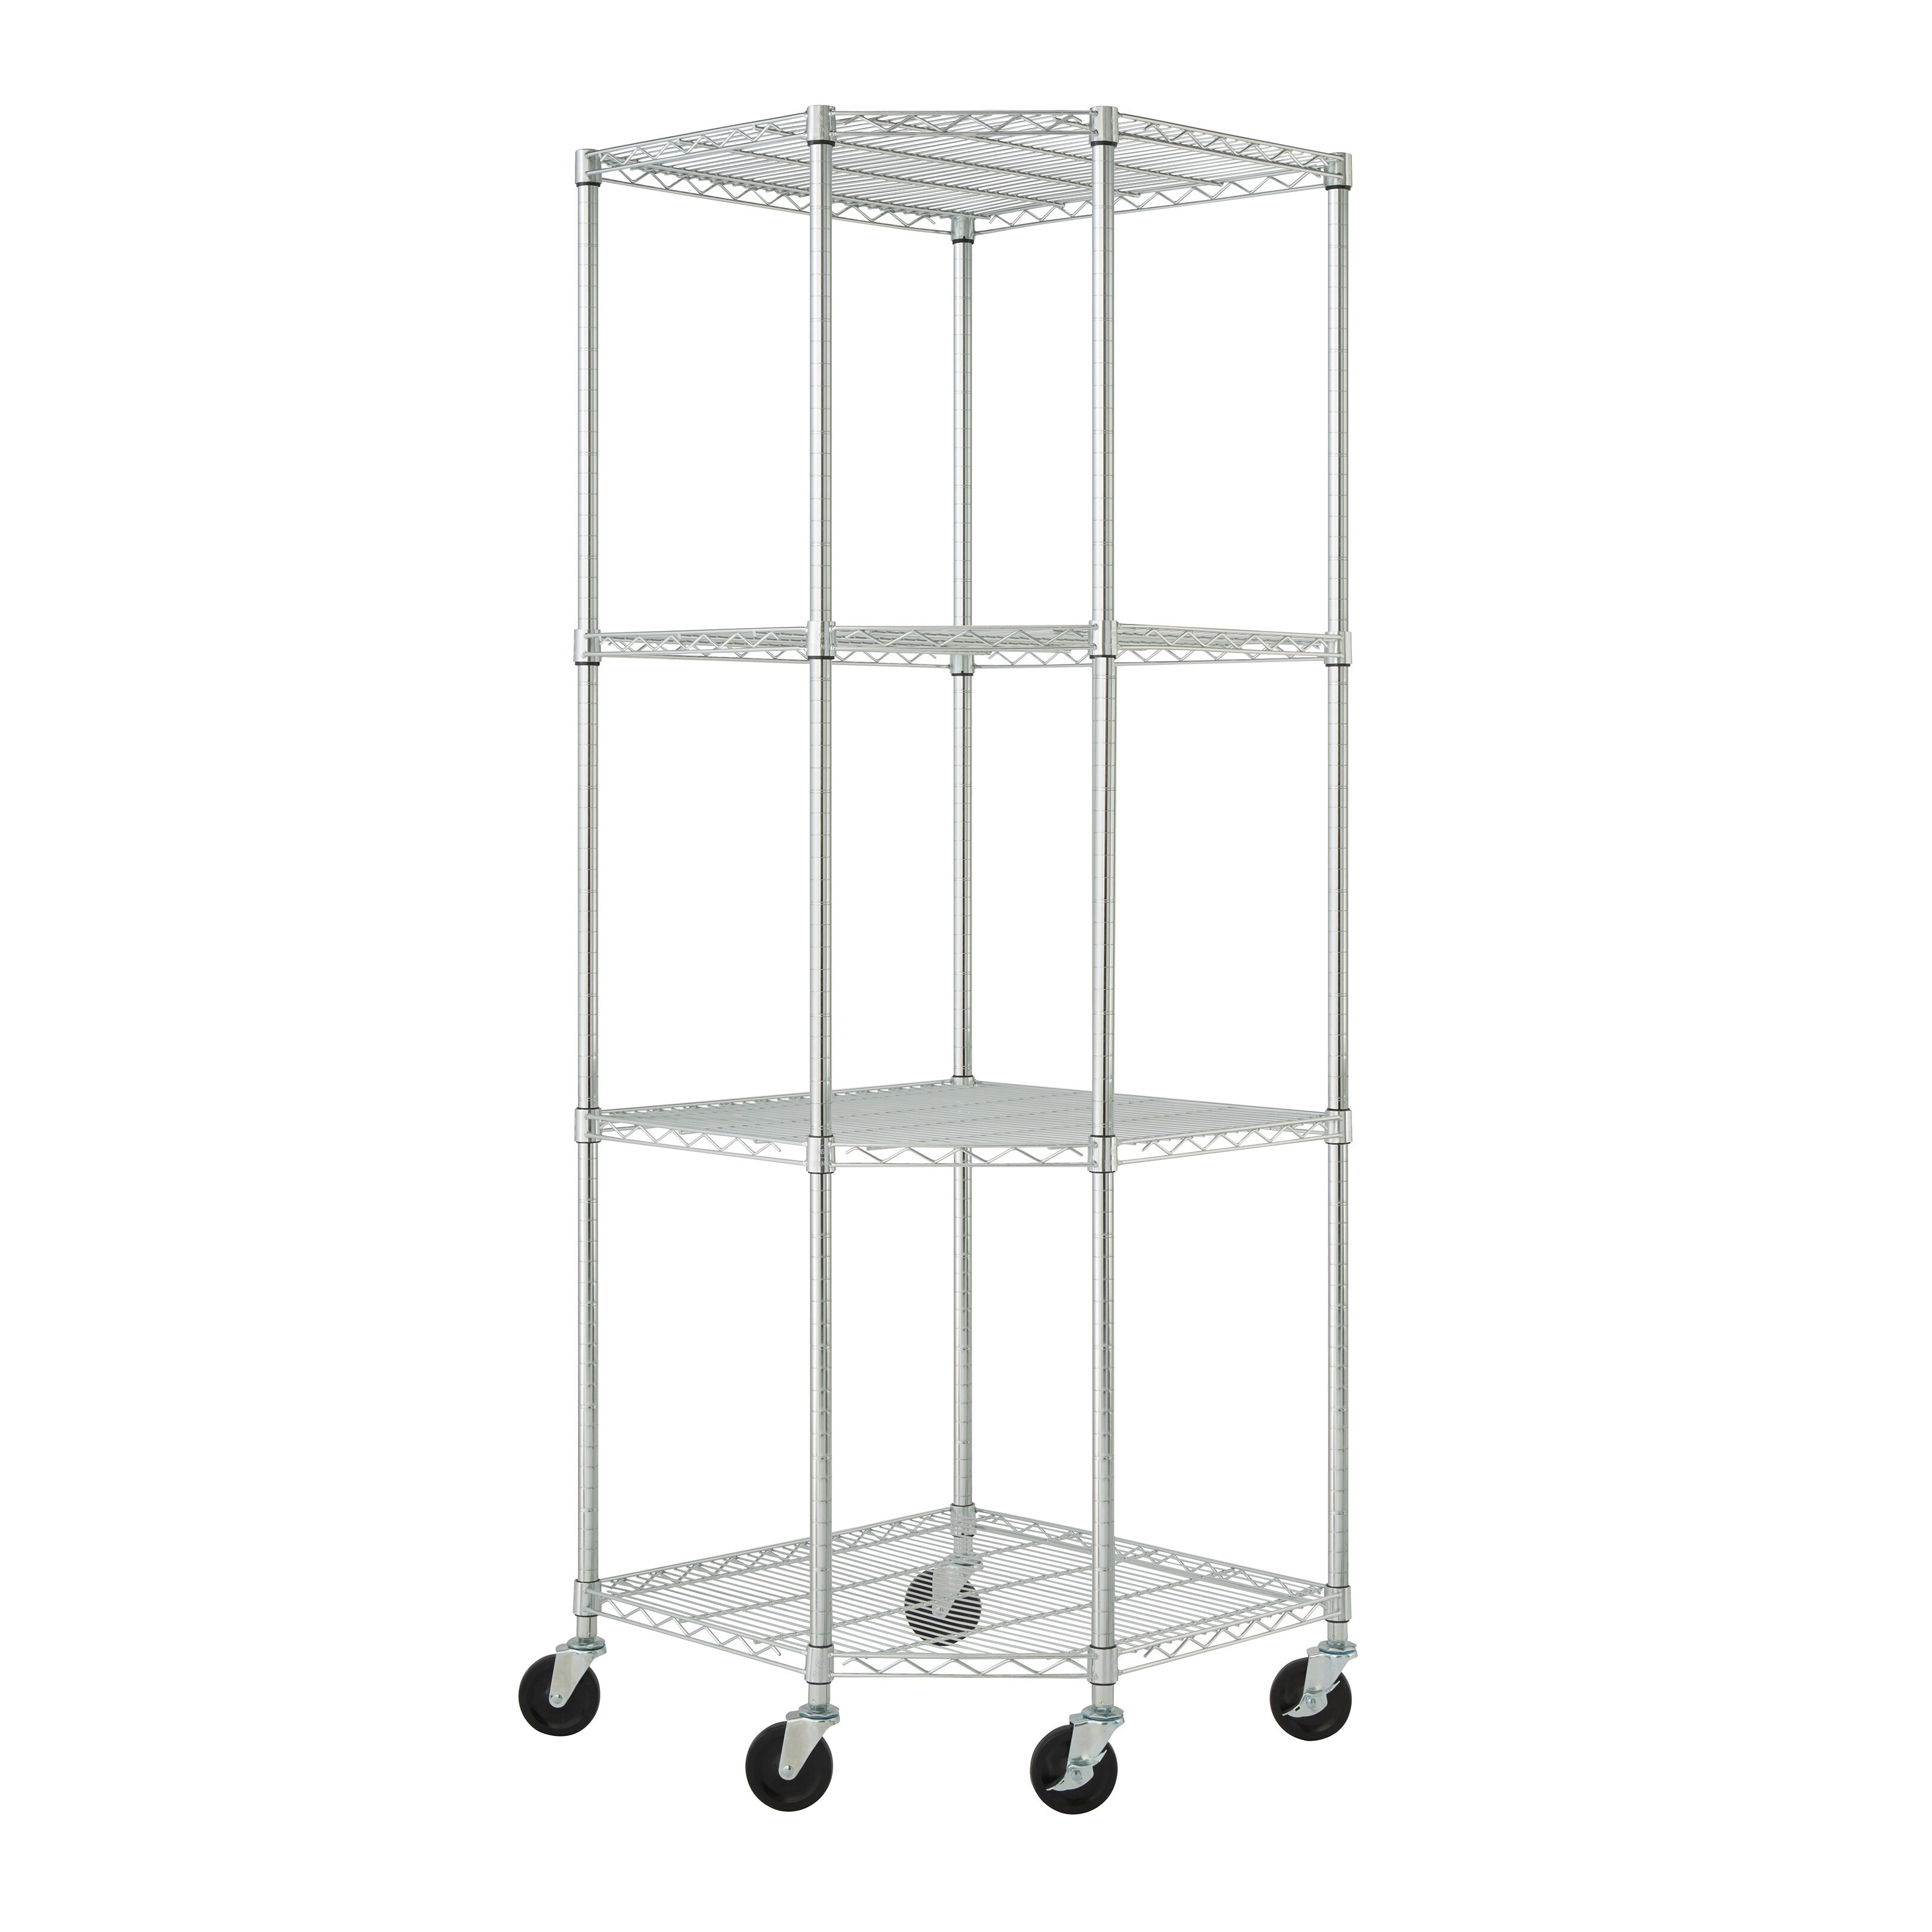 https://ak1.ostkcdn.com/images/products/is/images/direct/d1bd9a38cf2c0fb2f1643b21f3705eb1ba6291ce/TRINITY-EcoStorage-4-tier-Chrome-Wire-Wheeled-Corner-Shelving-Rack.jpg